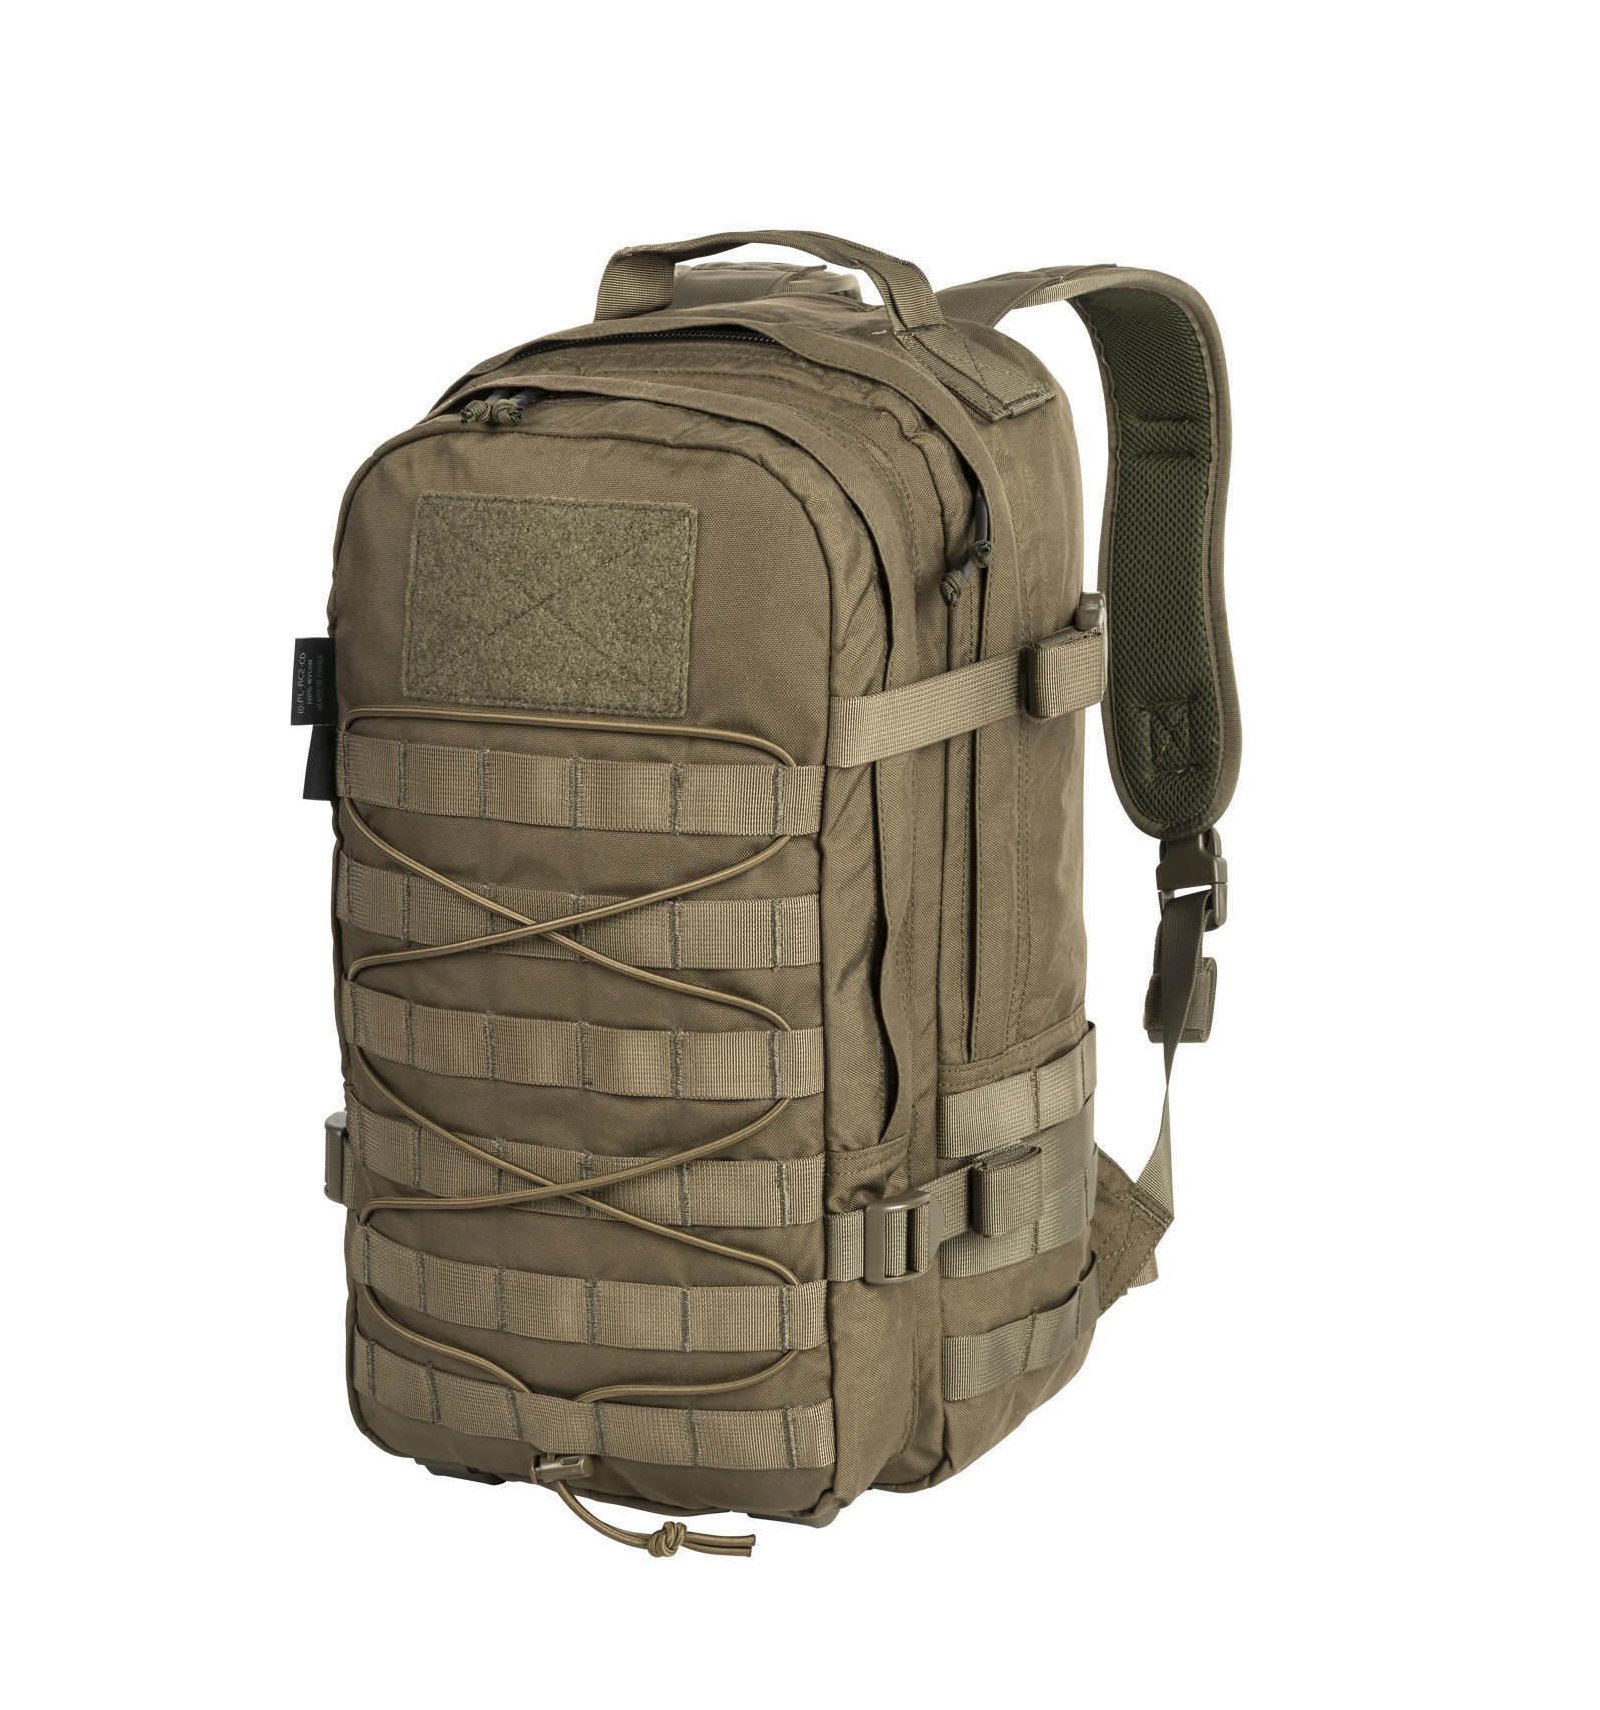 Newest molle system military backpack tactical for hunting camping